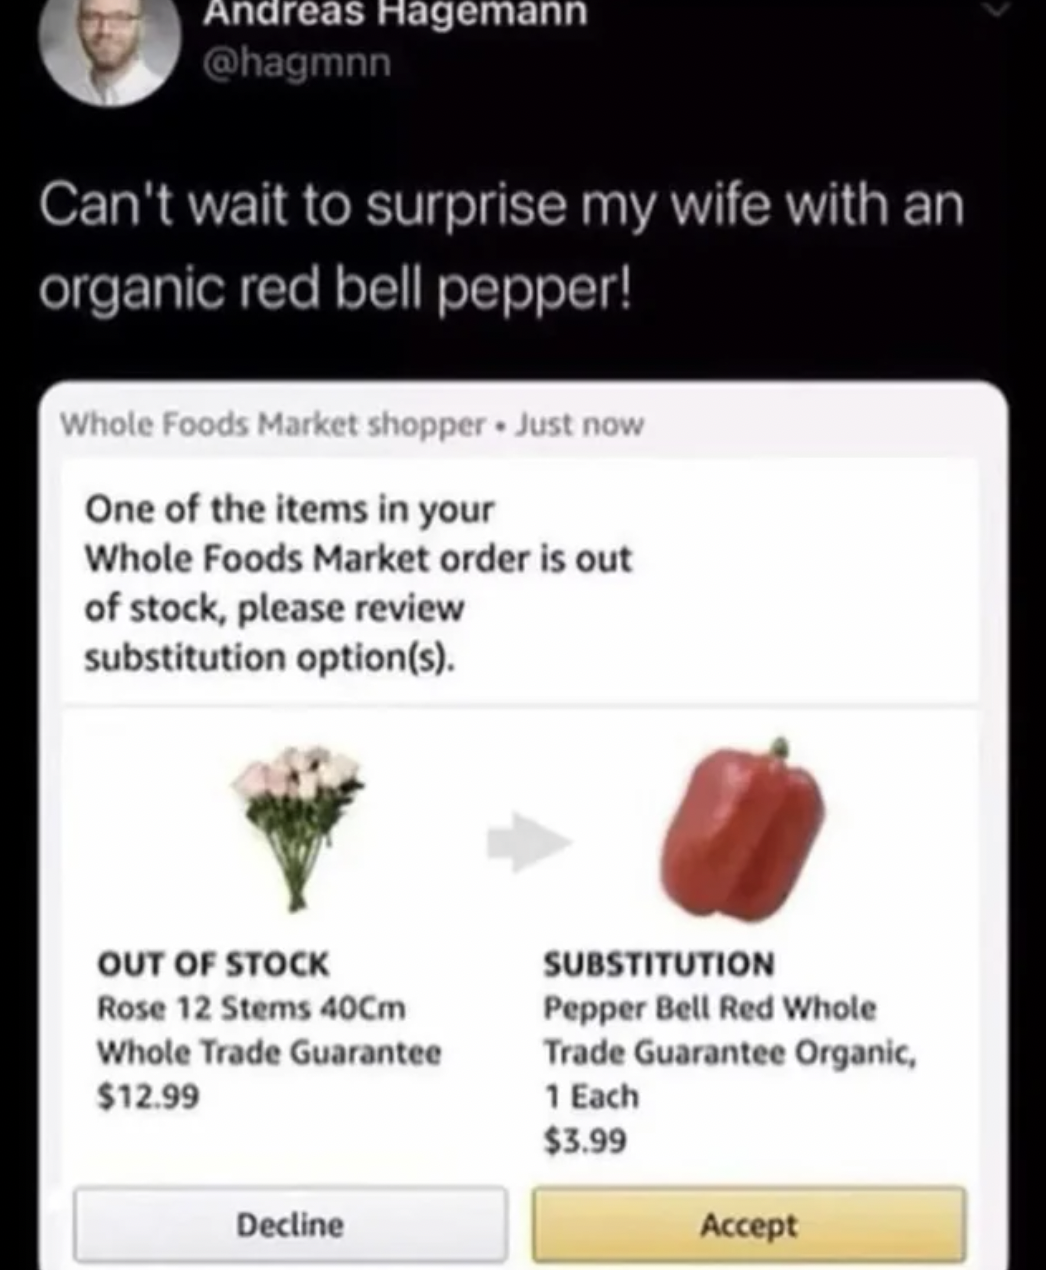 Dumb pics - cant wait to surprise my wife with ab organic red bell pepper - Andreas Hagemann Can't wait to surprise my wife with an organic red bell pepper! Whole Foods Market shopper. Just now One of the items in your Whole Foods Market order is out of s